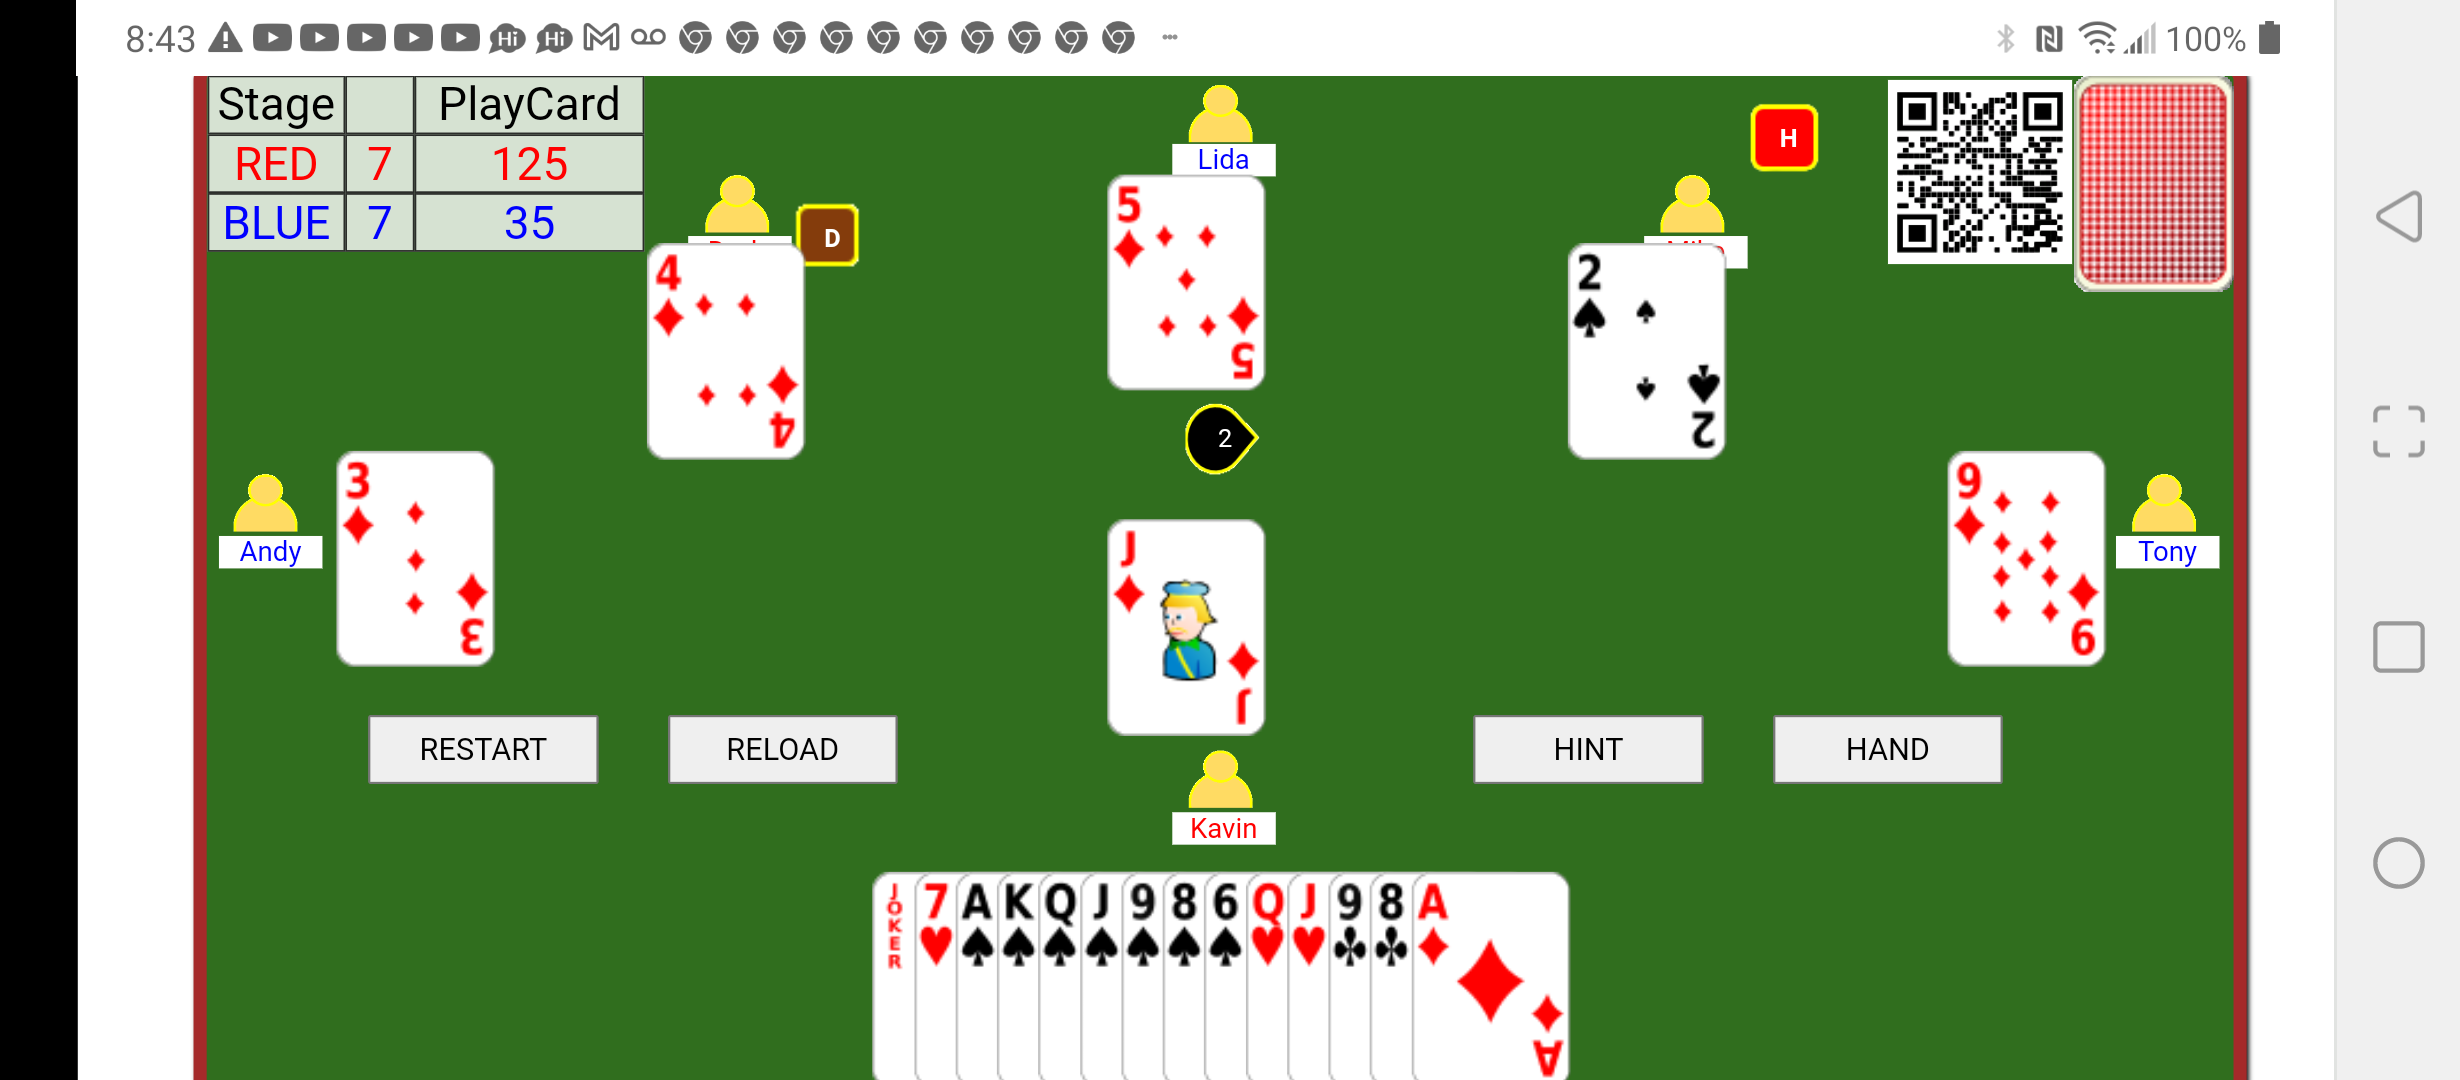 html5 tractor card game Screenshot_20220116-084327.png